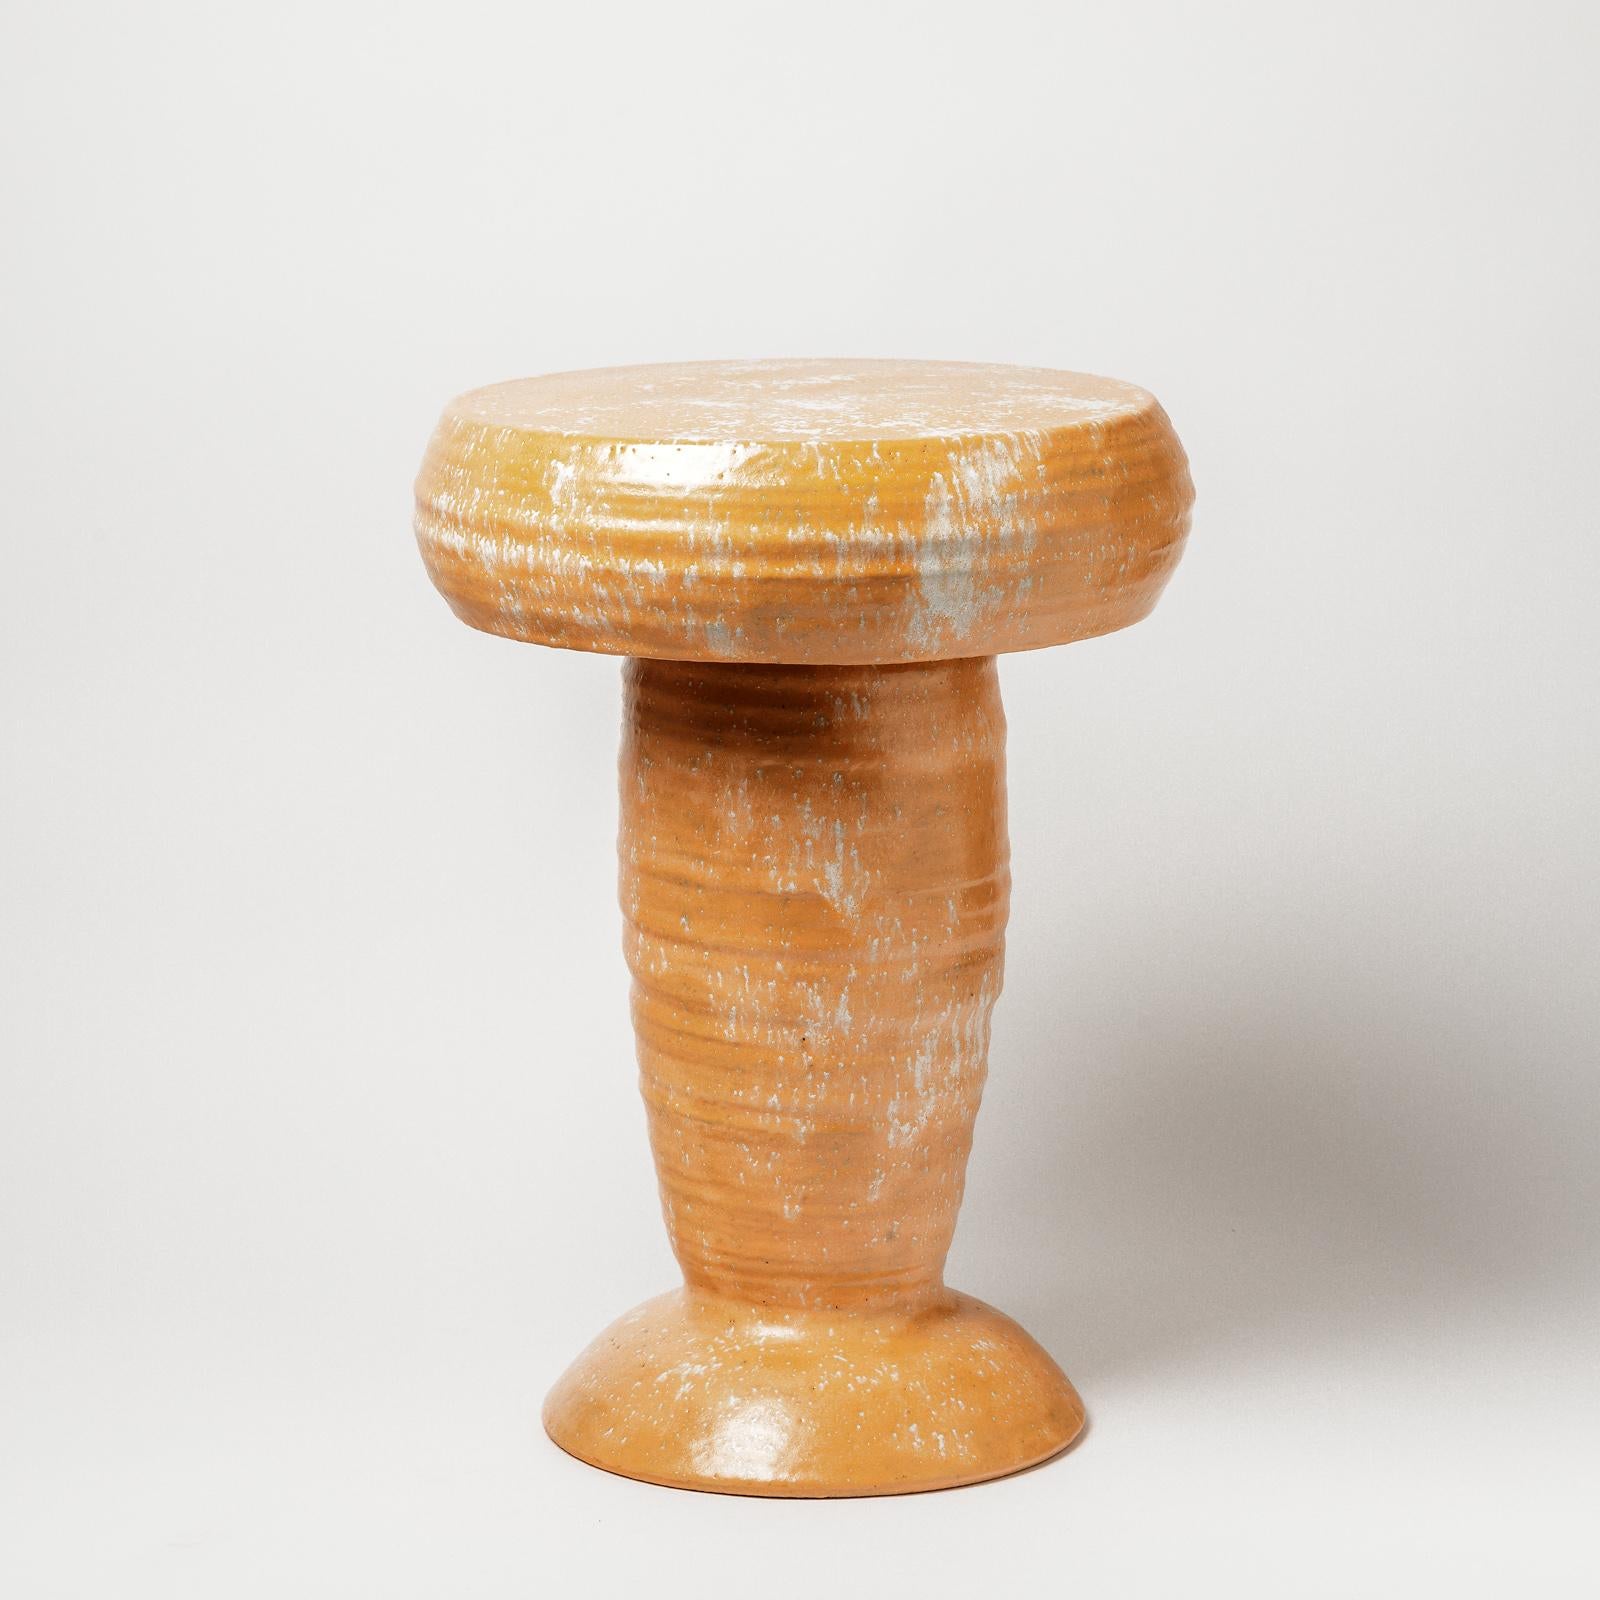 A ceramic stool with orange and white glazes decoration by Mia Jensen.
Unique piece.
Signed under the base.
Circa 2021.